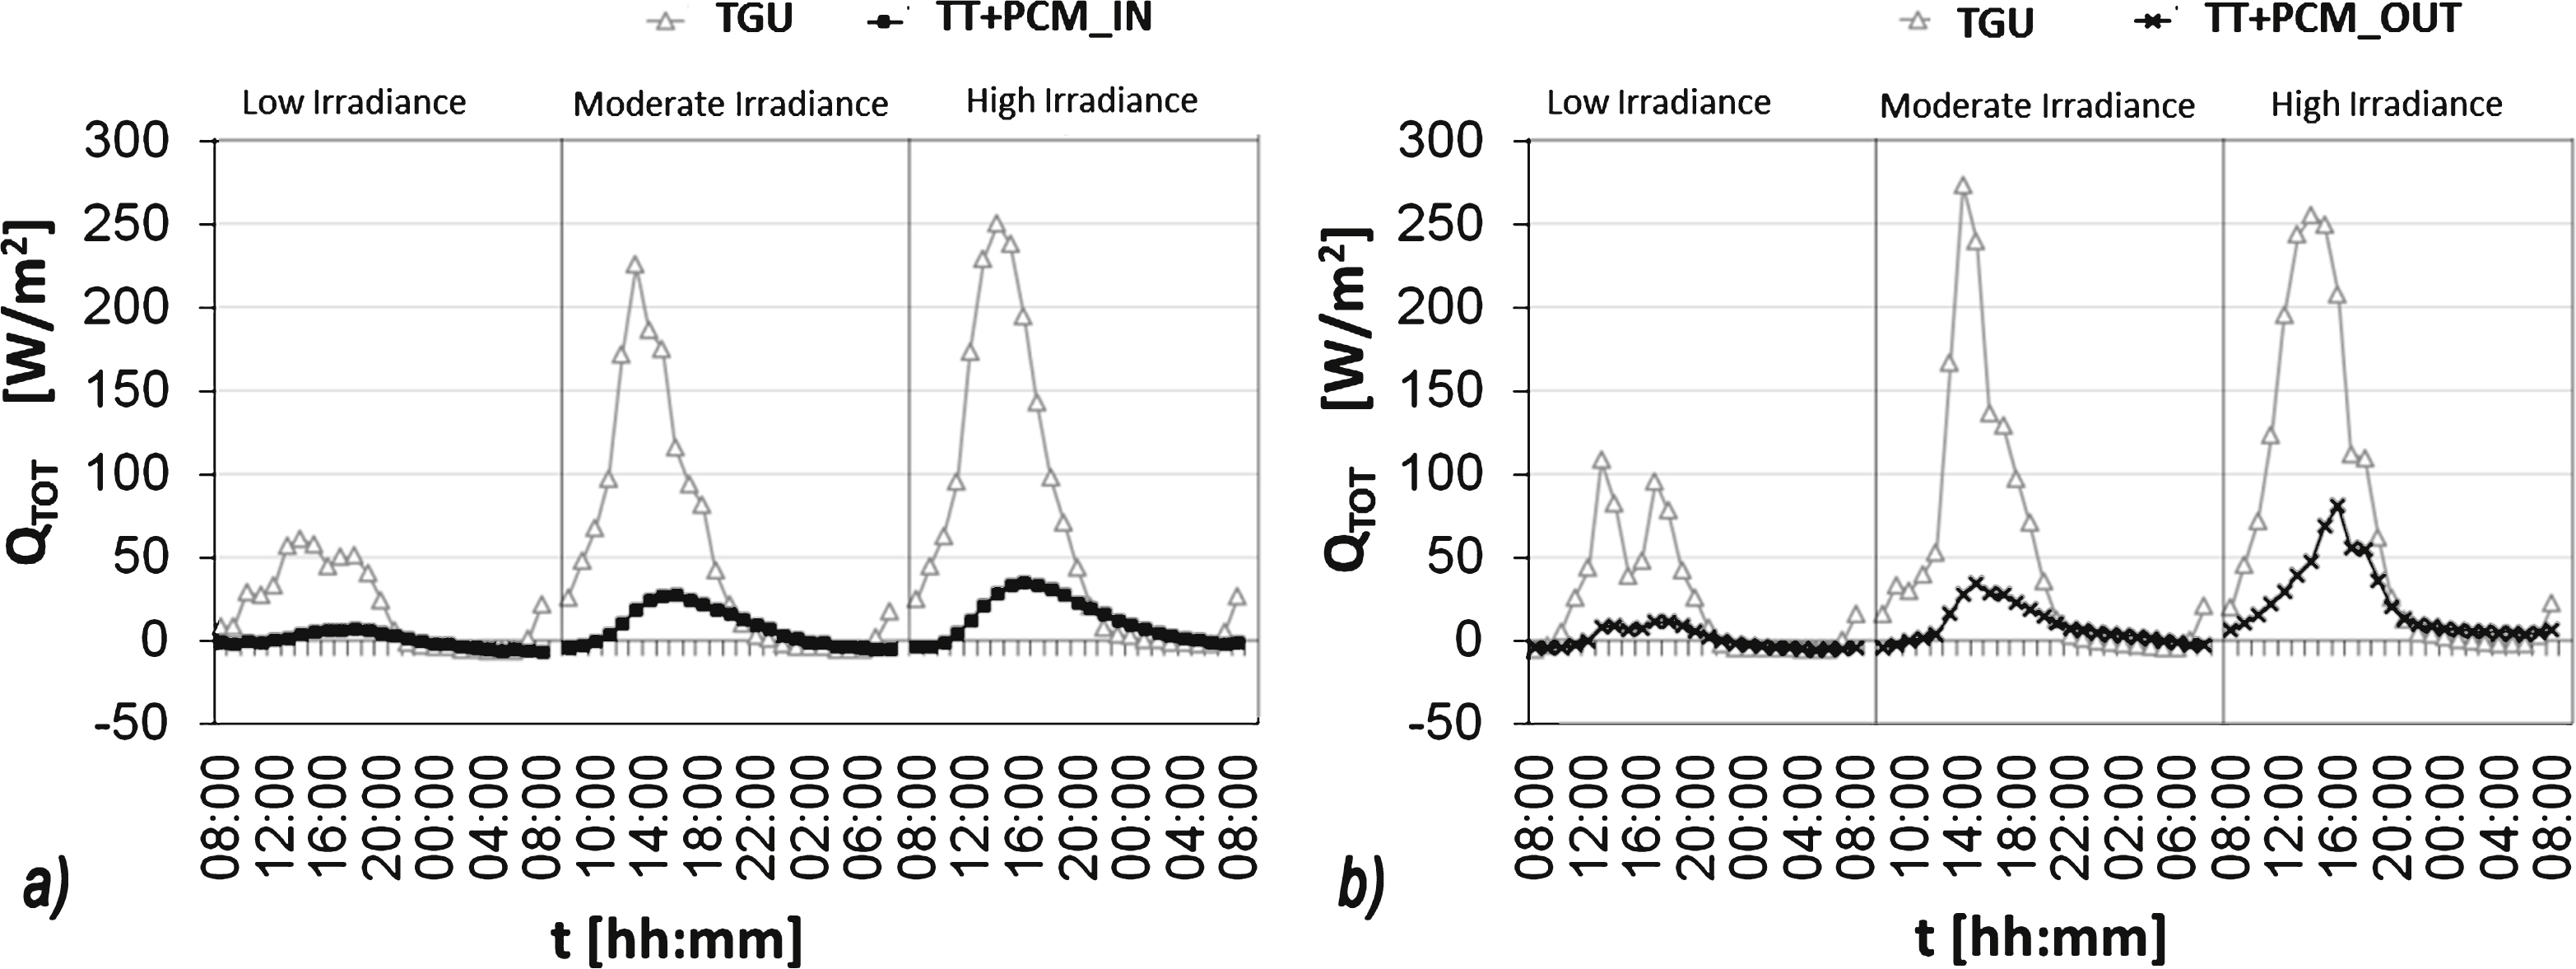 Time profiles of total heat flux – TT+PCM_IN and reference (a) and TT+PCM_OUT and reference (b).